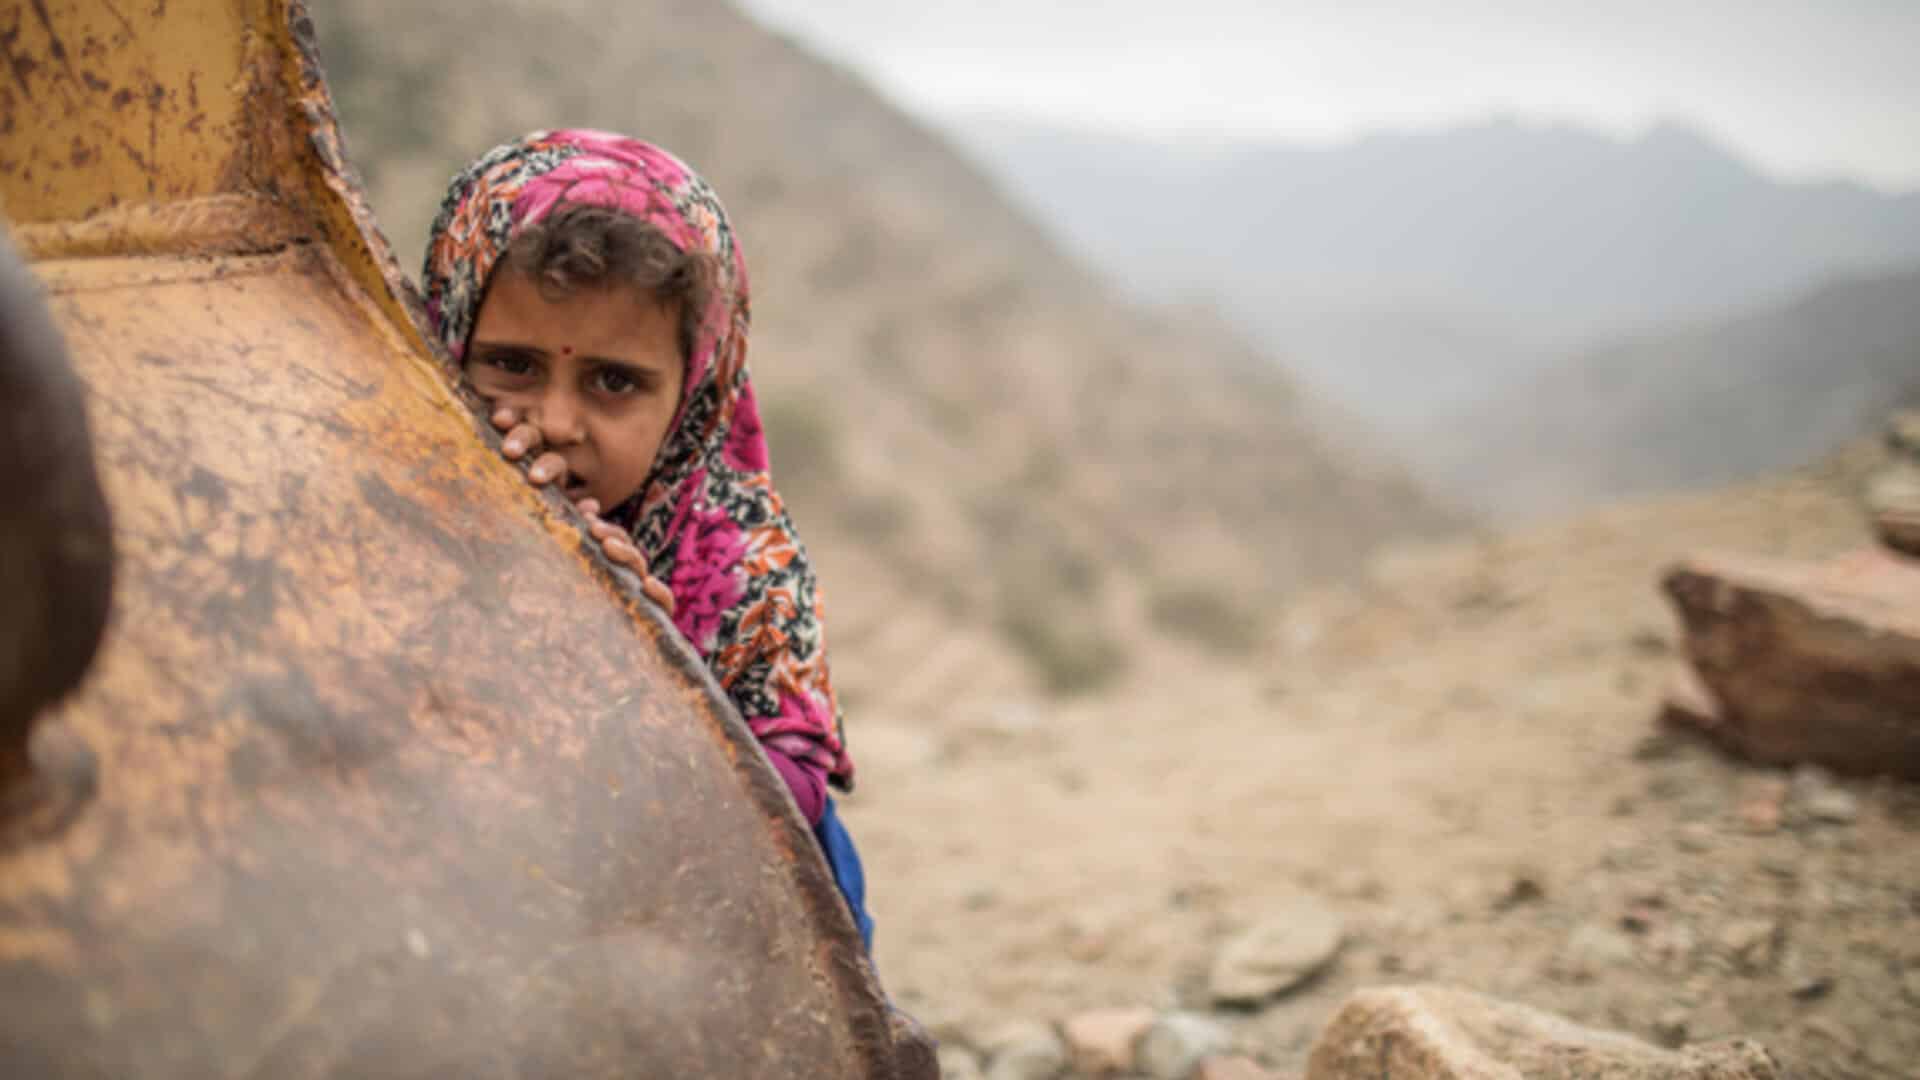 Yemeni girl with an atribulated look shows her face will covering behind a metal object, Yemeni mountains in the background. Photo: Kellie Ryan/IRC.